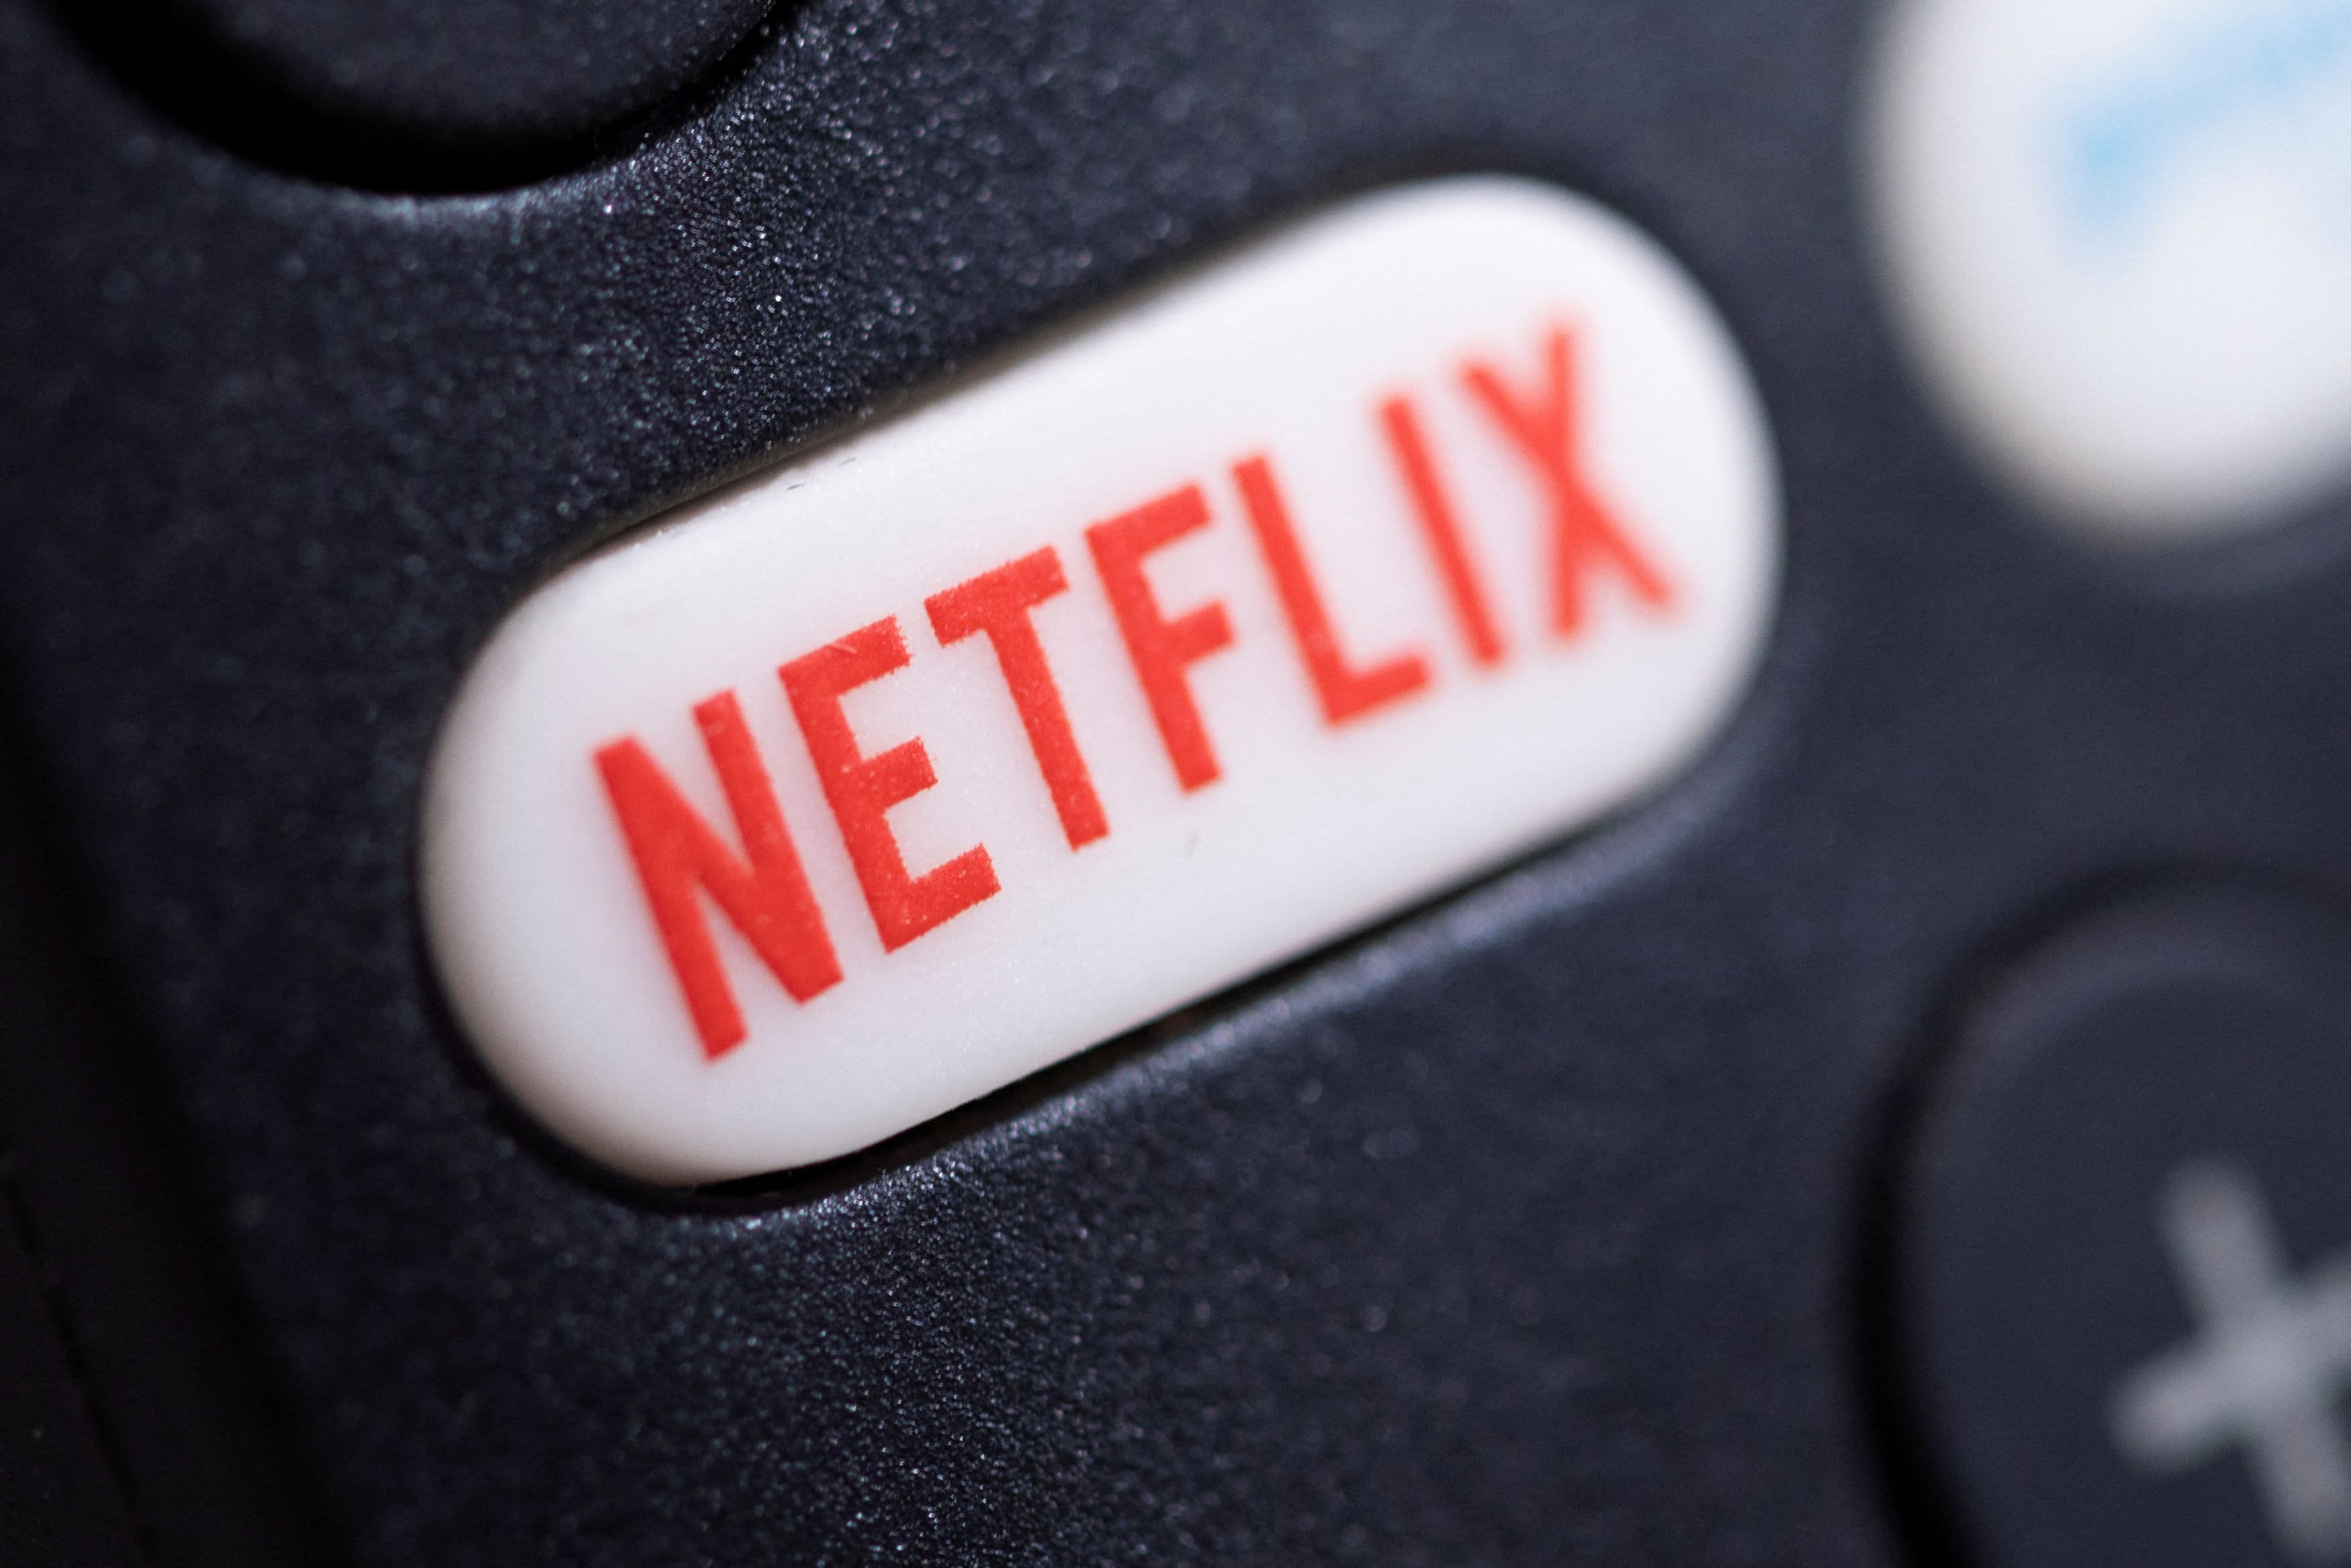 Oppenheimer upgrades Netflix, says new ad tier can boost growth